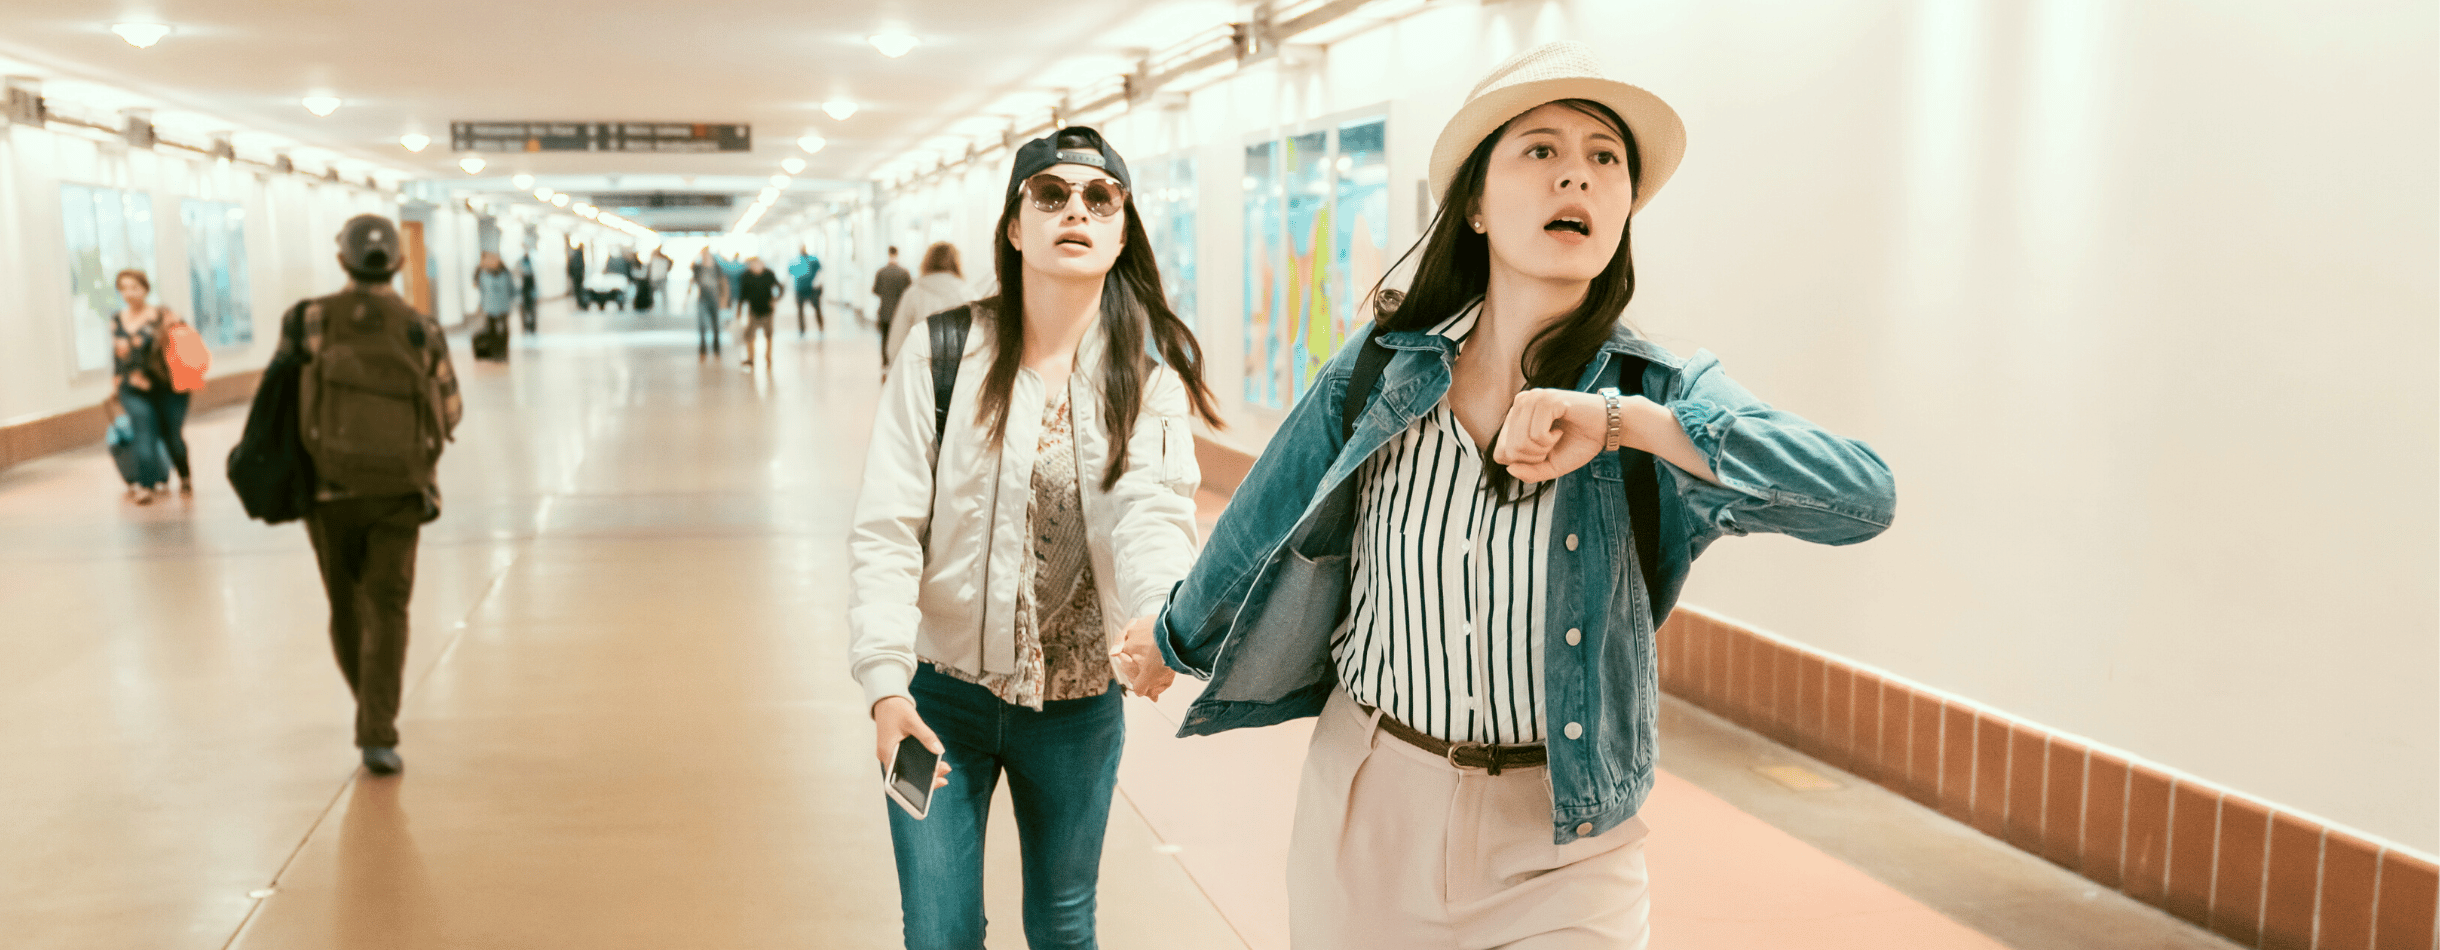 Two women are rushing to catch their flight on time. One of them is holding up her watch, likely using it to see how much time they have until their plane departs..